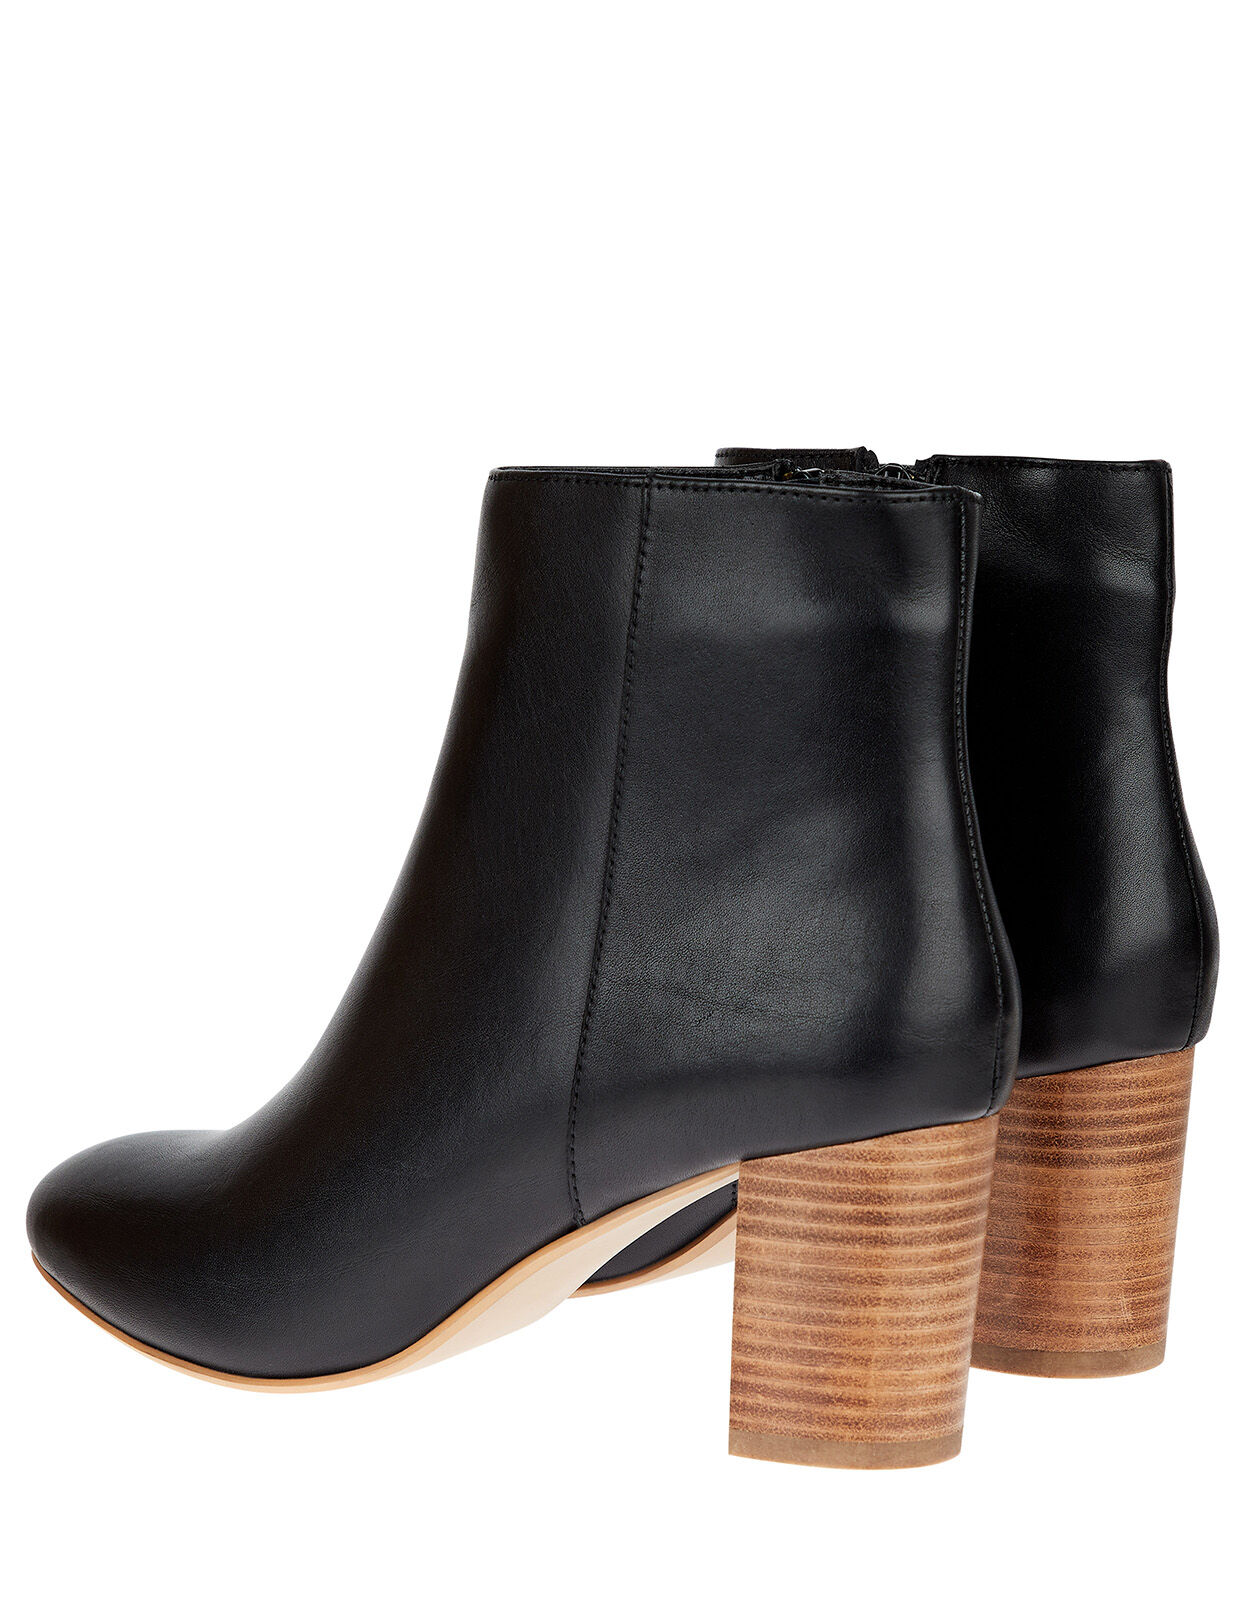 black stacked heel ankle boot